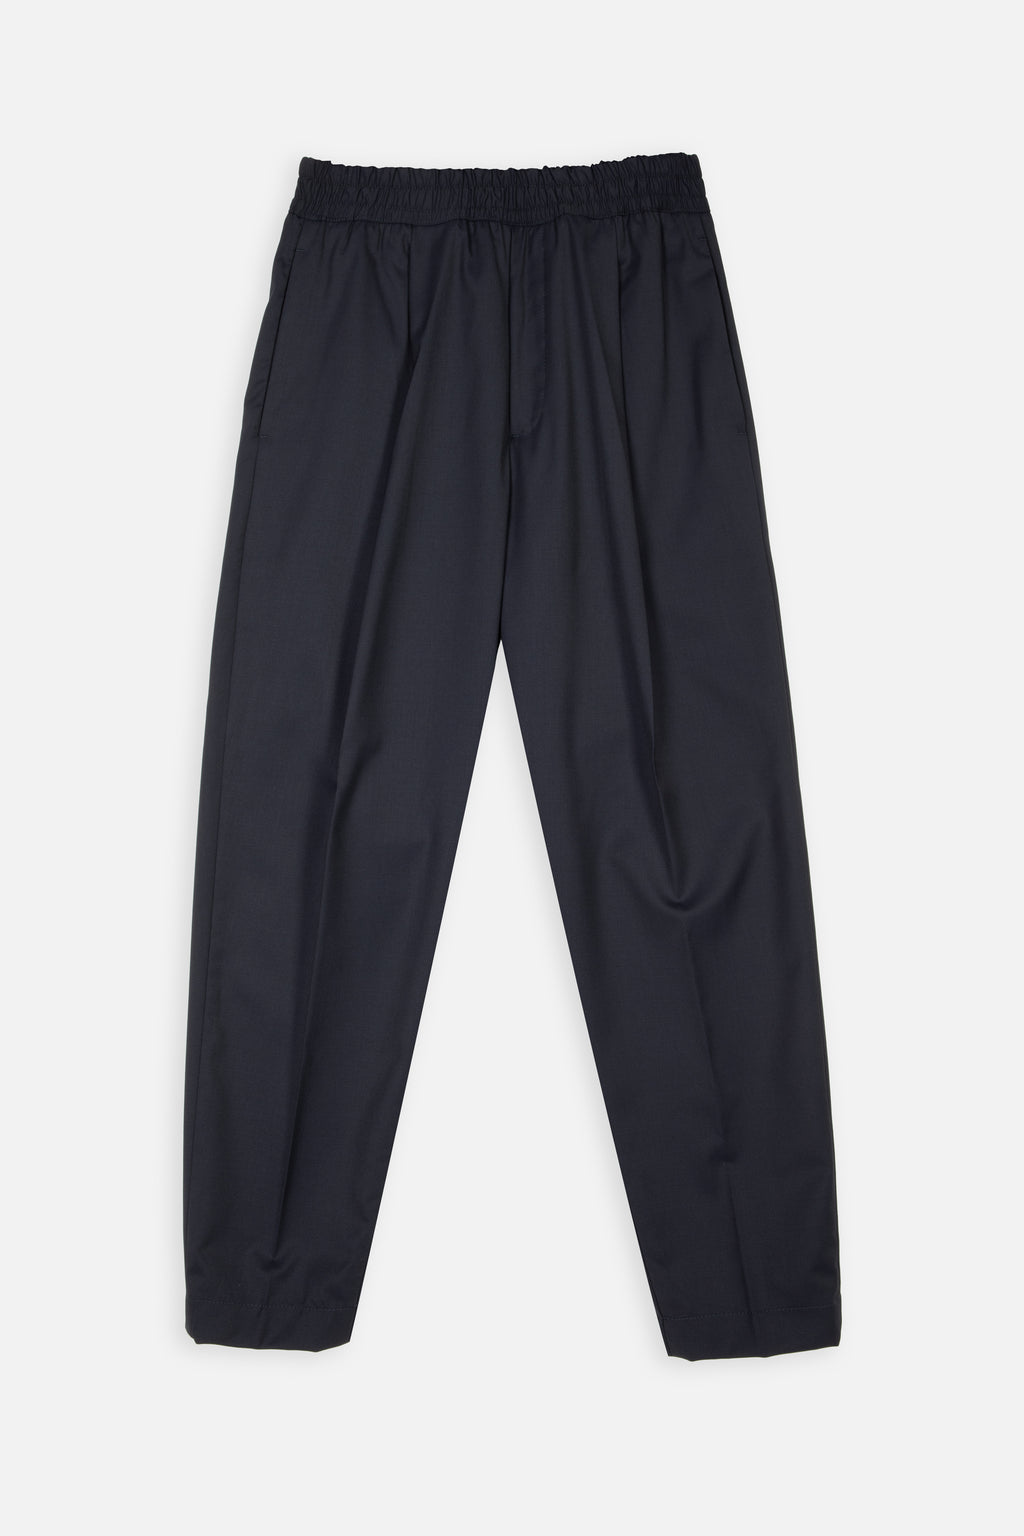 alt-image__Navy-blue-wool-tailored-pant-with-elastic-waistband---Savoys